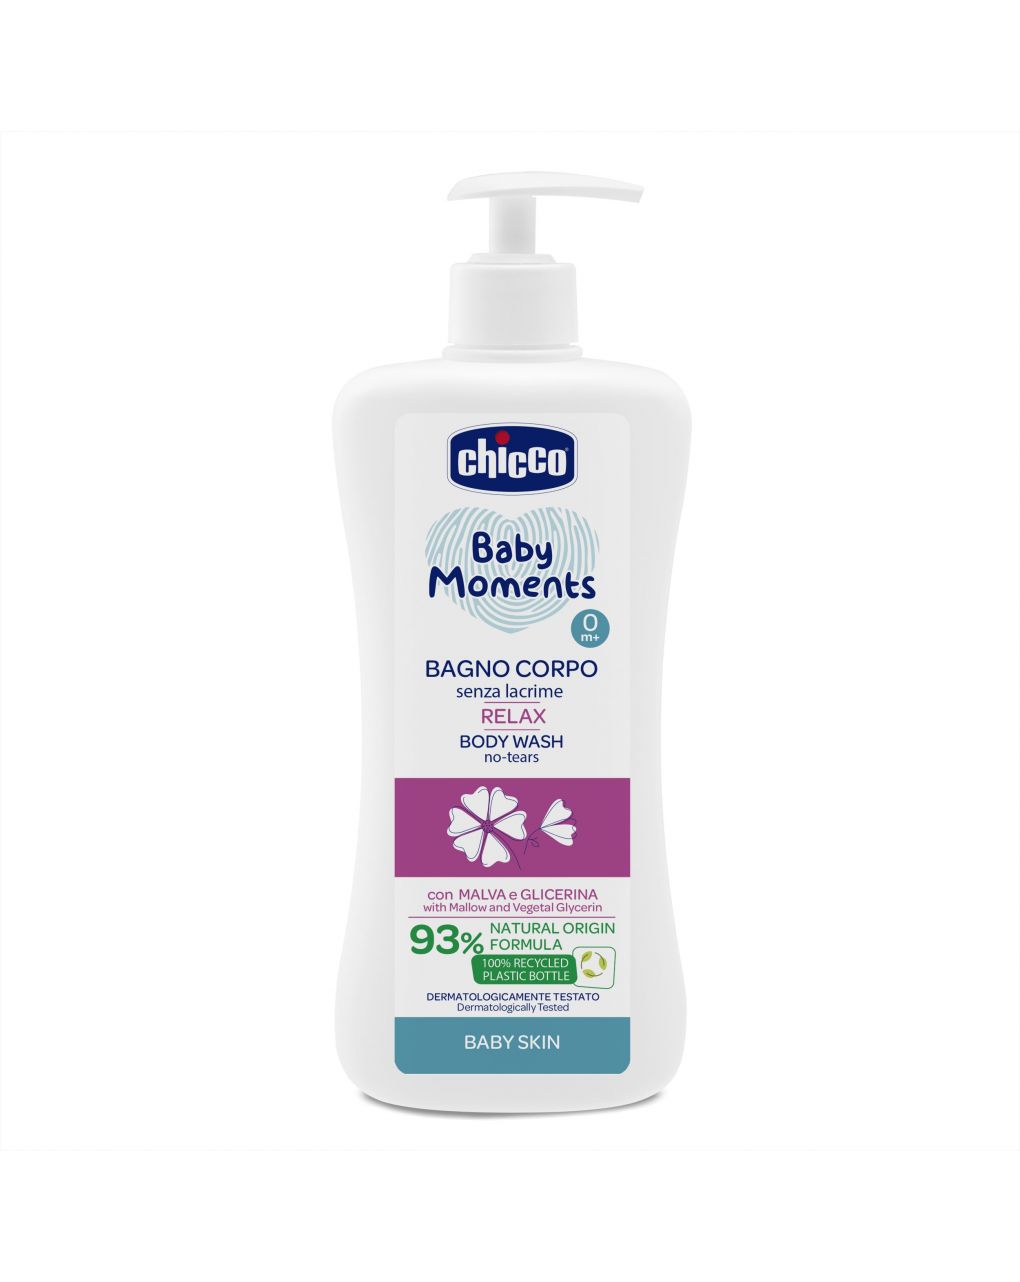 Banho corporal relax baby moments chicco baby skin - Chicco